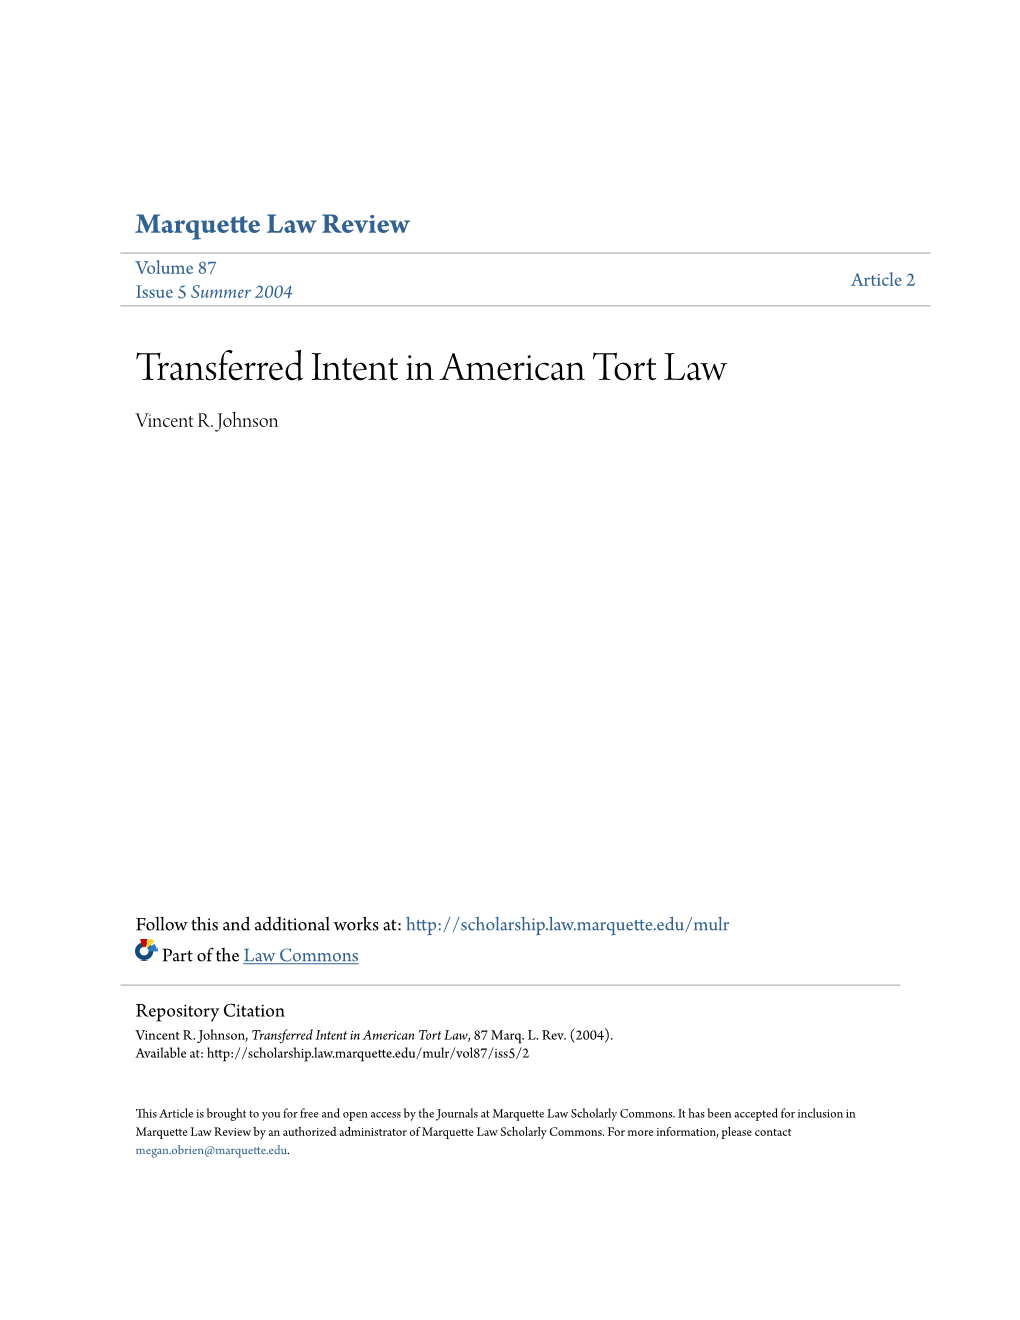 Transferred Intent in American Tort Law Vincent R